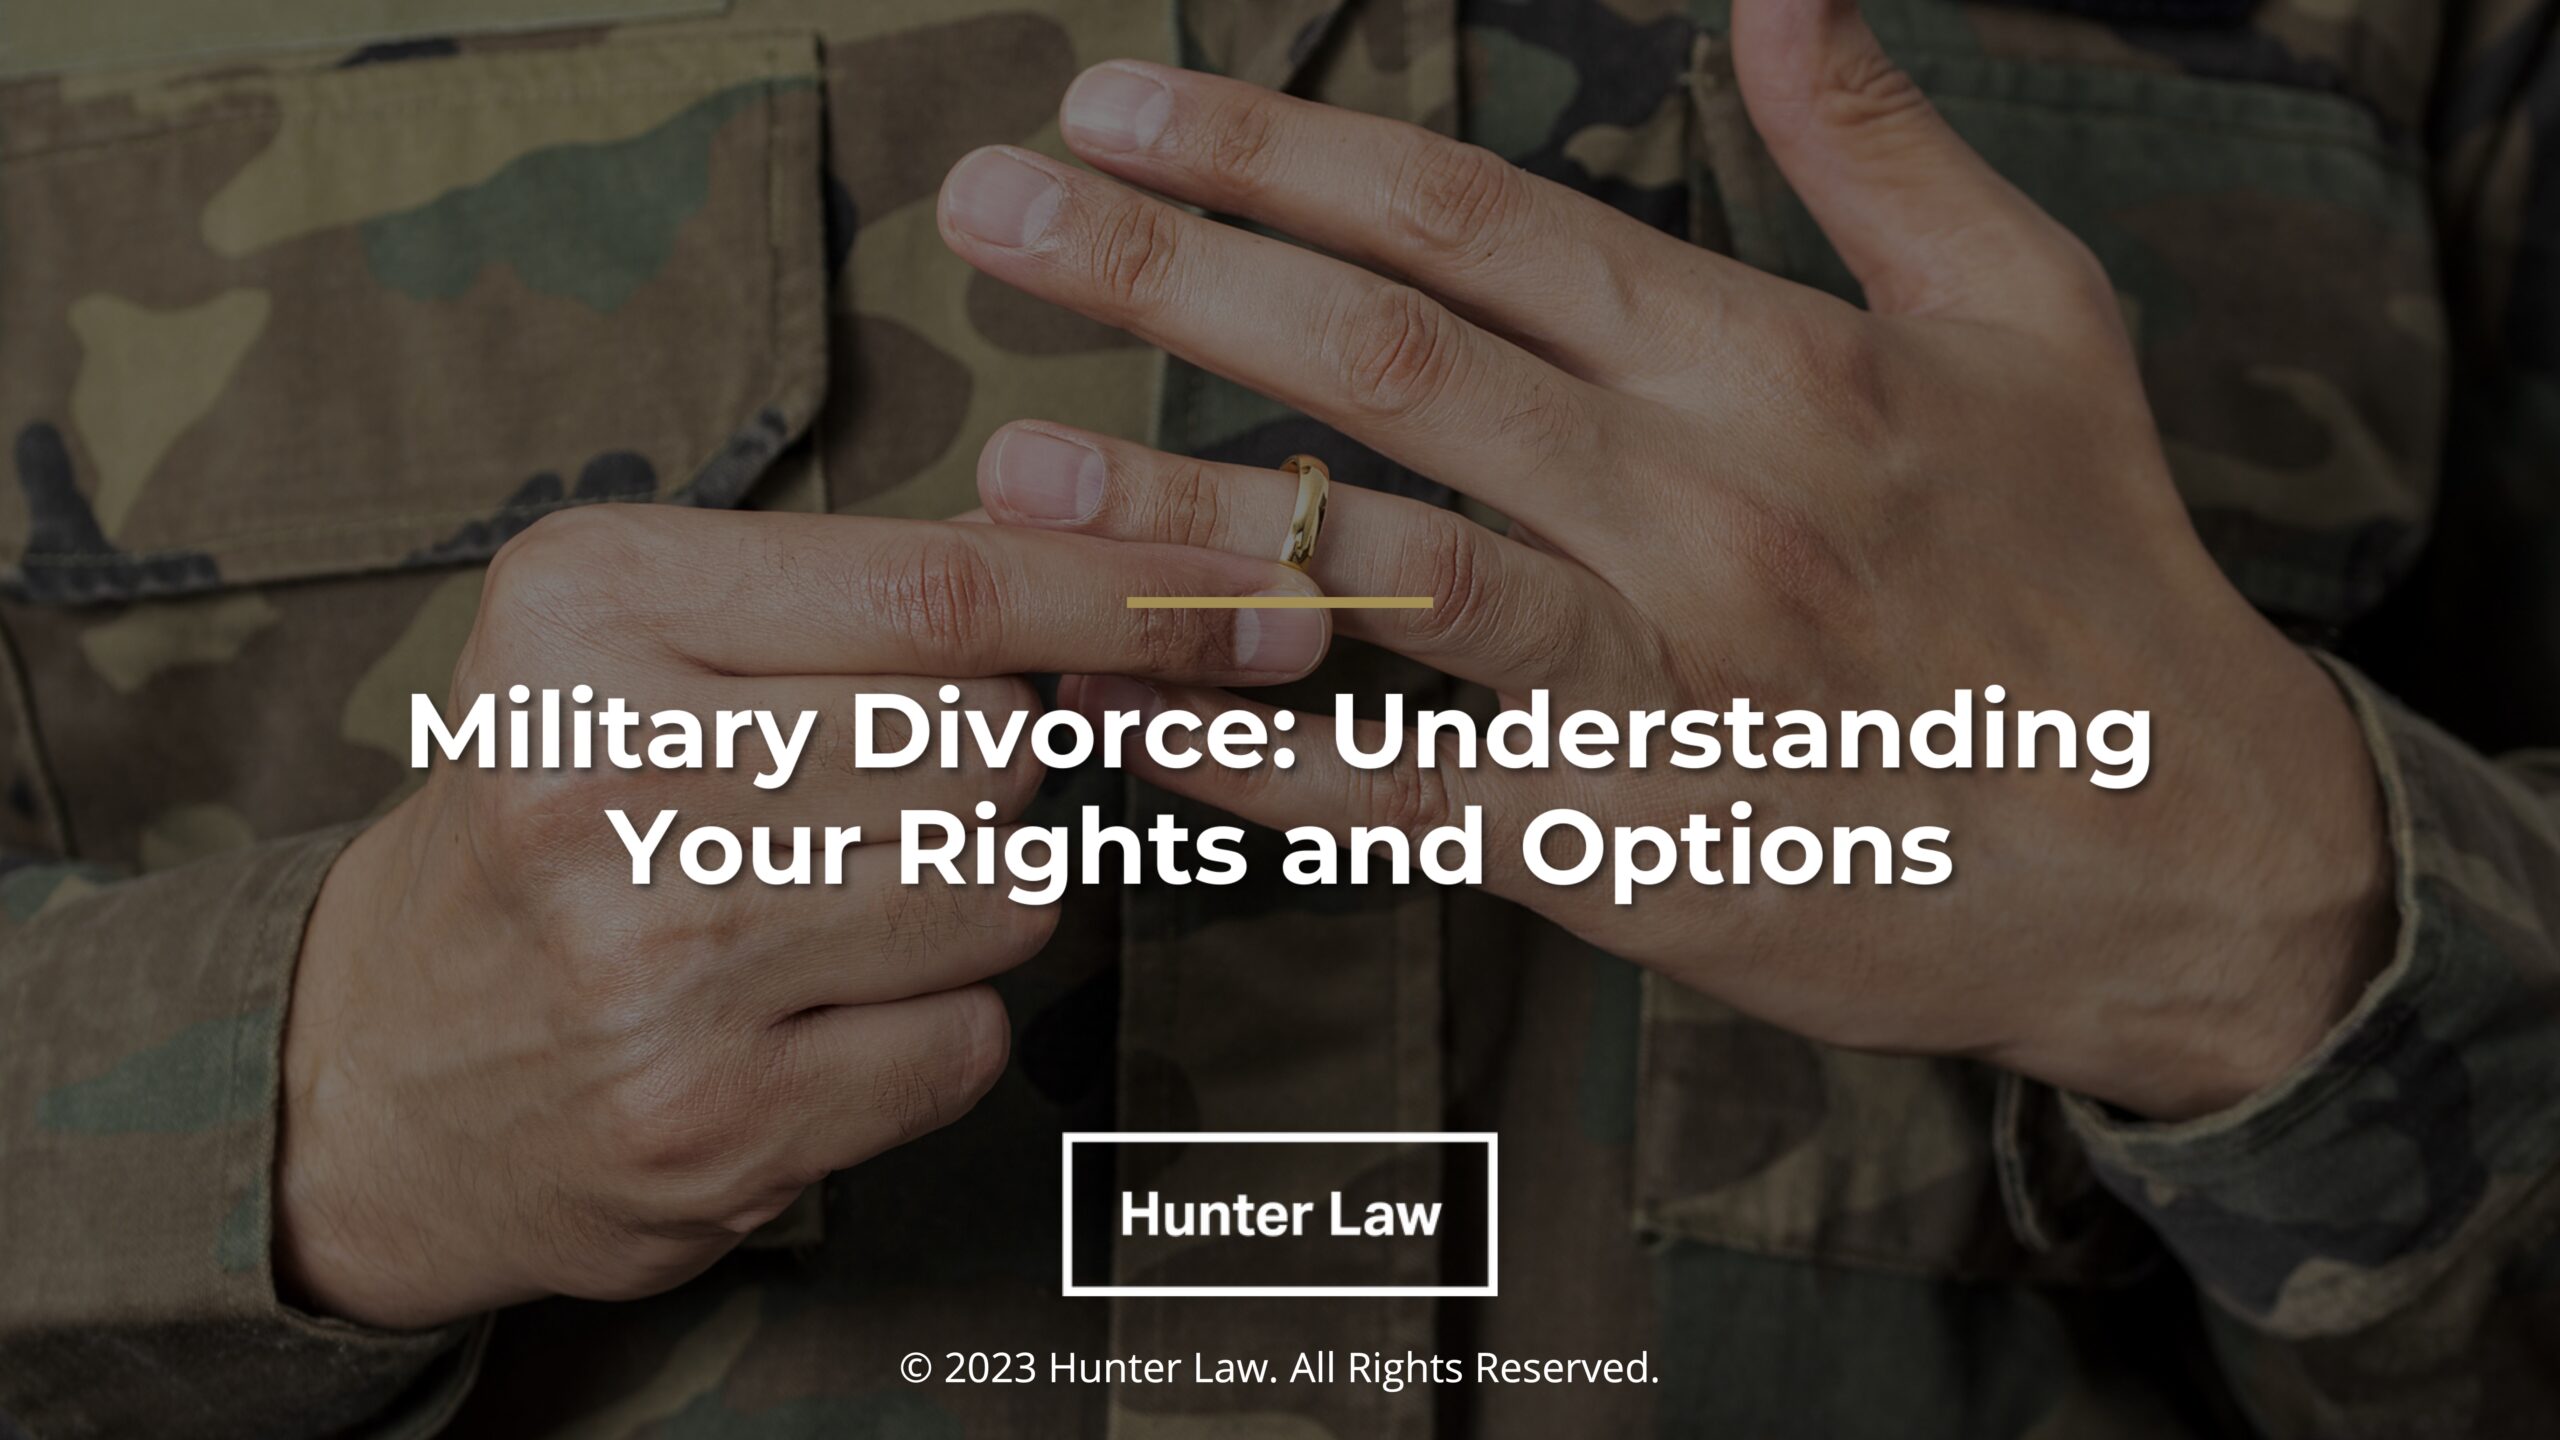 Featured: Male soldier's hands about ready to remove his wedding ring- Military Divorce: Understanding your rights and options